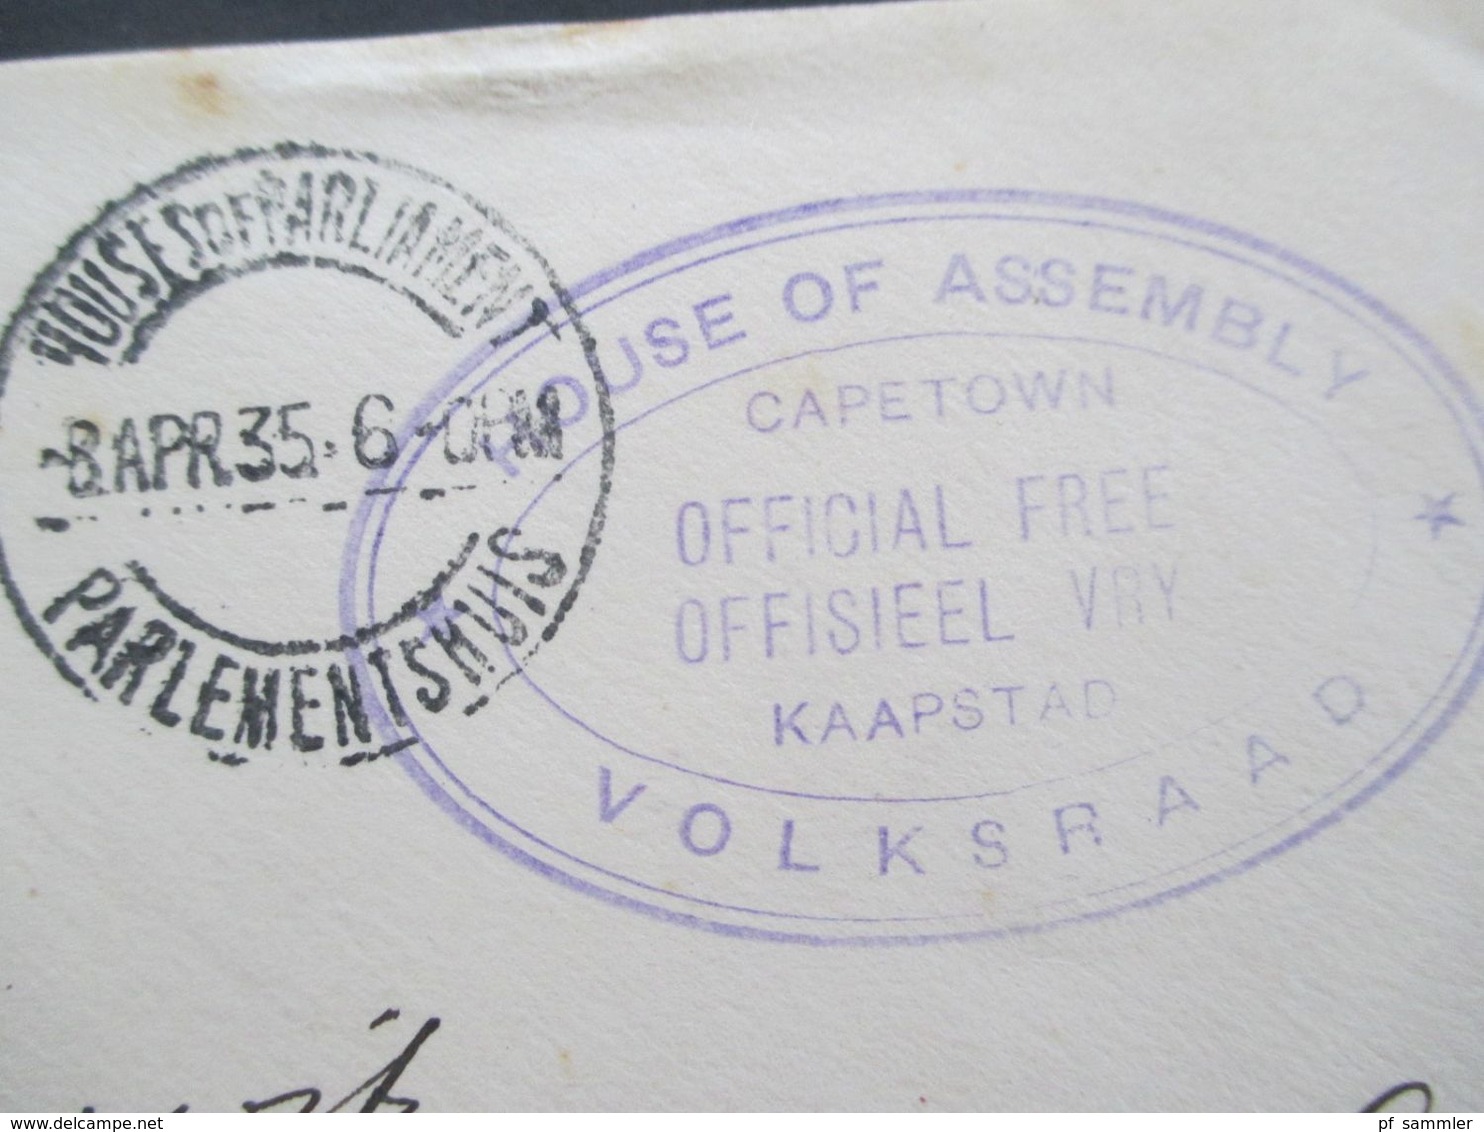 Südafrika 1935 Stempel Houeses Of Parliament Parliament Und House Of Assembly Volksraad Official Free Cape Town - Briefe U. Dokumente